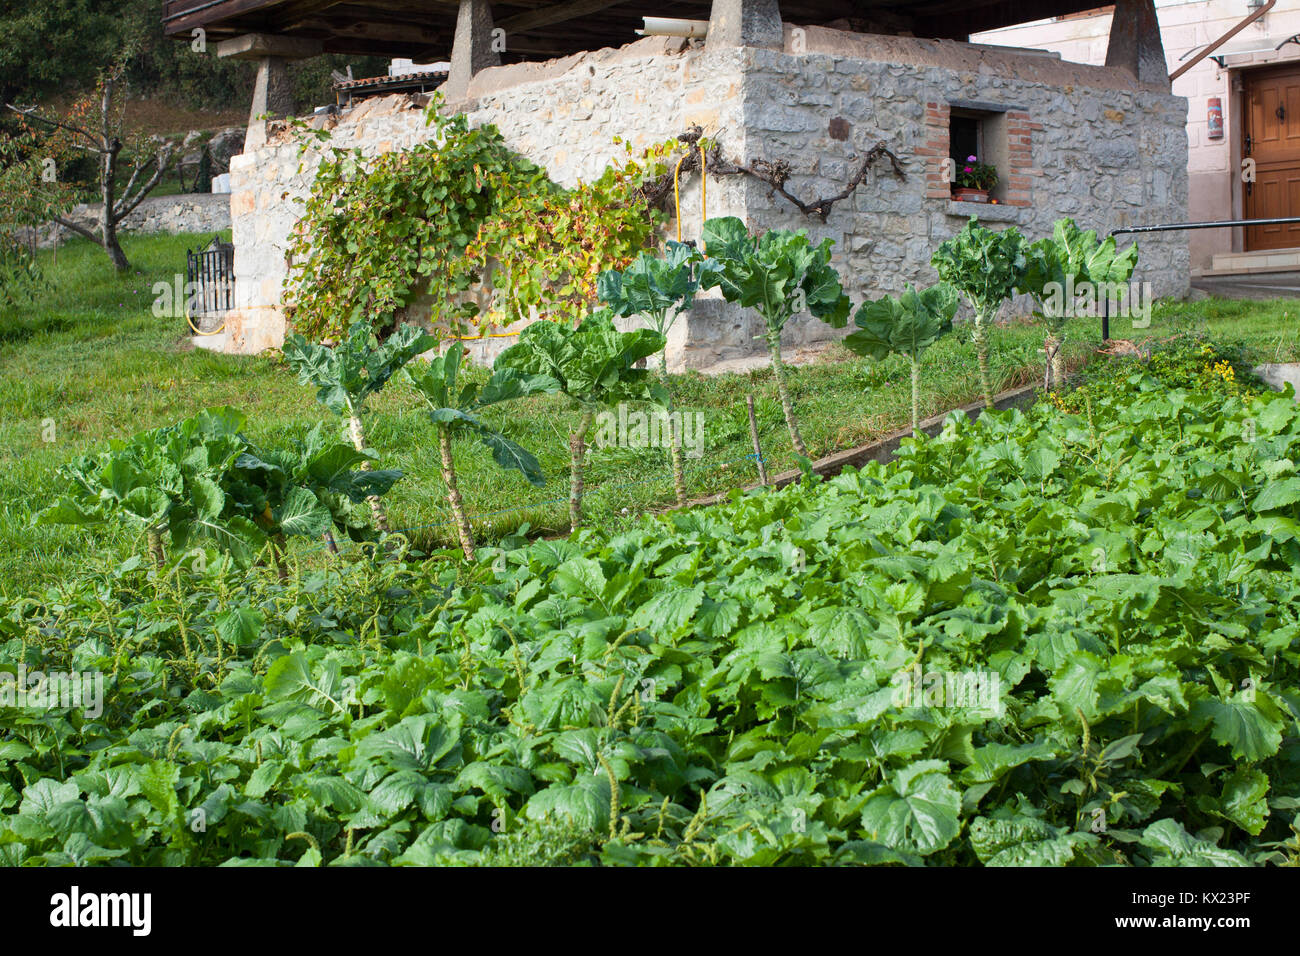 Brussels sprouts growing in the garden in Gallegos, Asturias, Spain Stock Photo